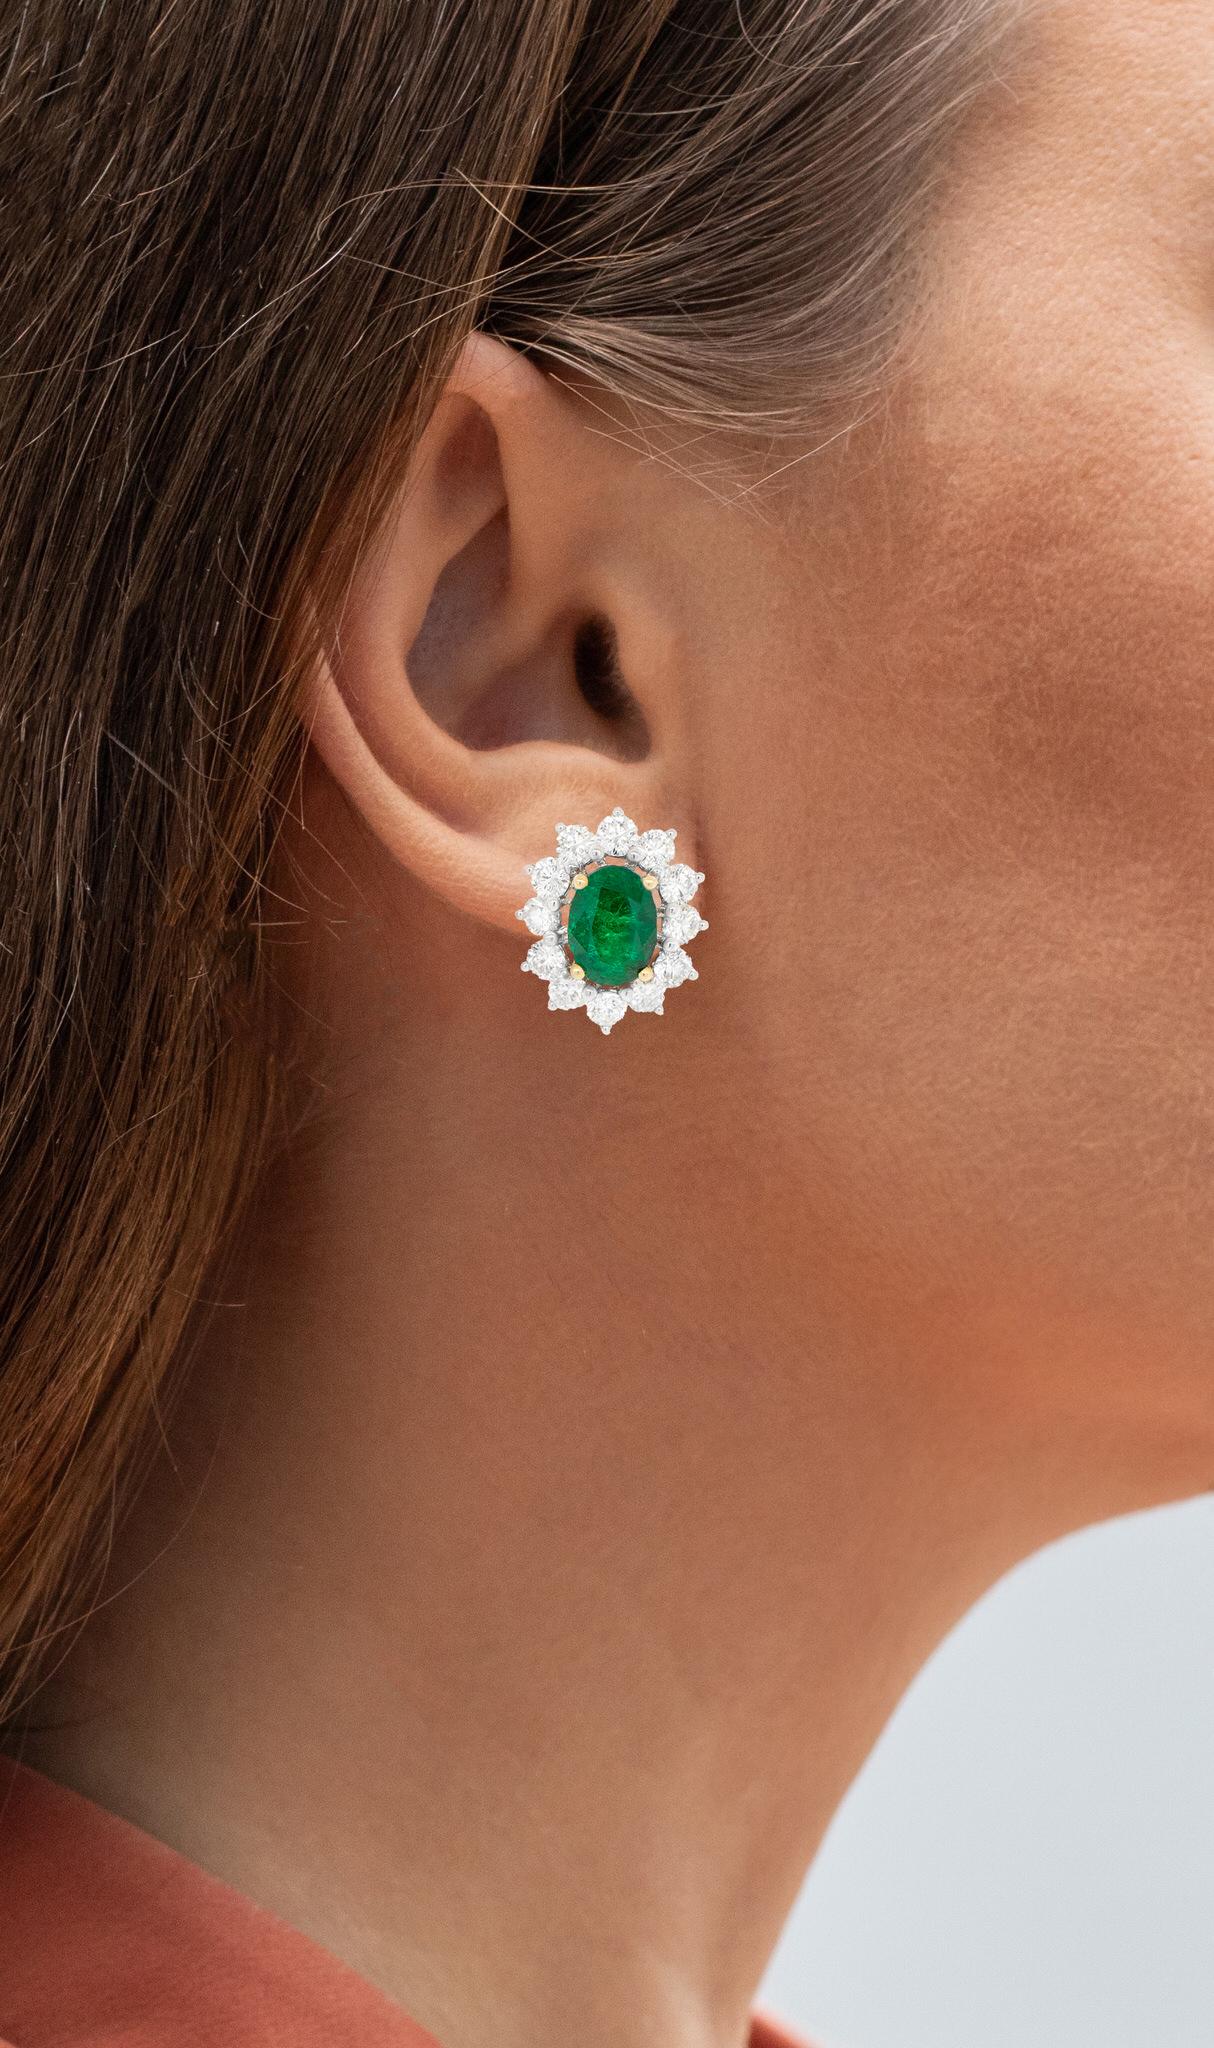 It comes with the Gemological Appraisal by GIA GG/AJP
All Gemstones are Natural
Emeralds = 3.97 Carats
Diamonds = 3.45 Carats
Metal: 18K Gold
Dimensions: 19 x 15 mm